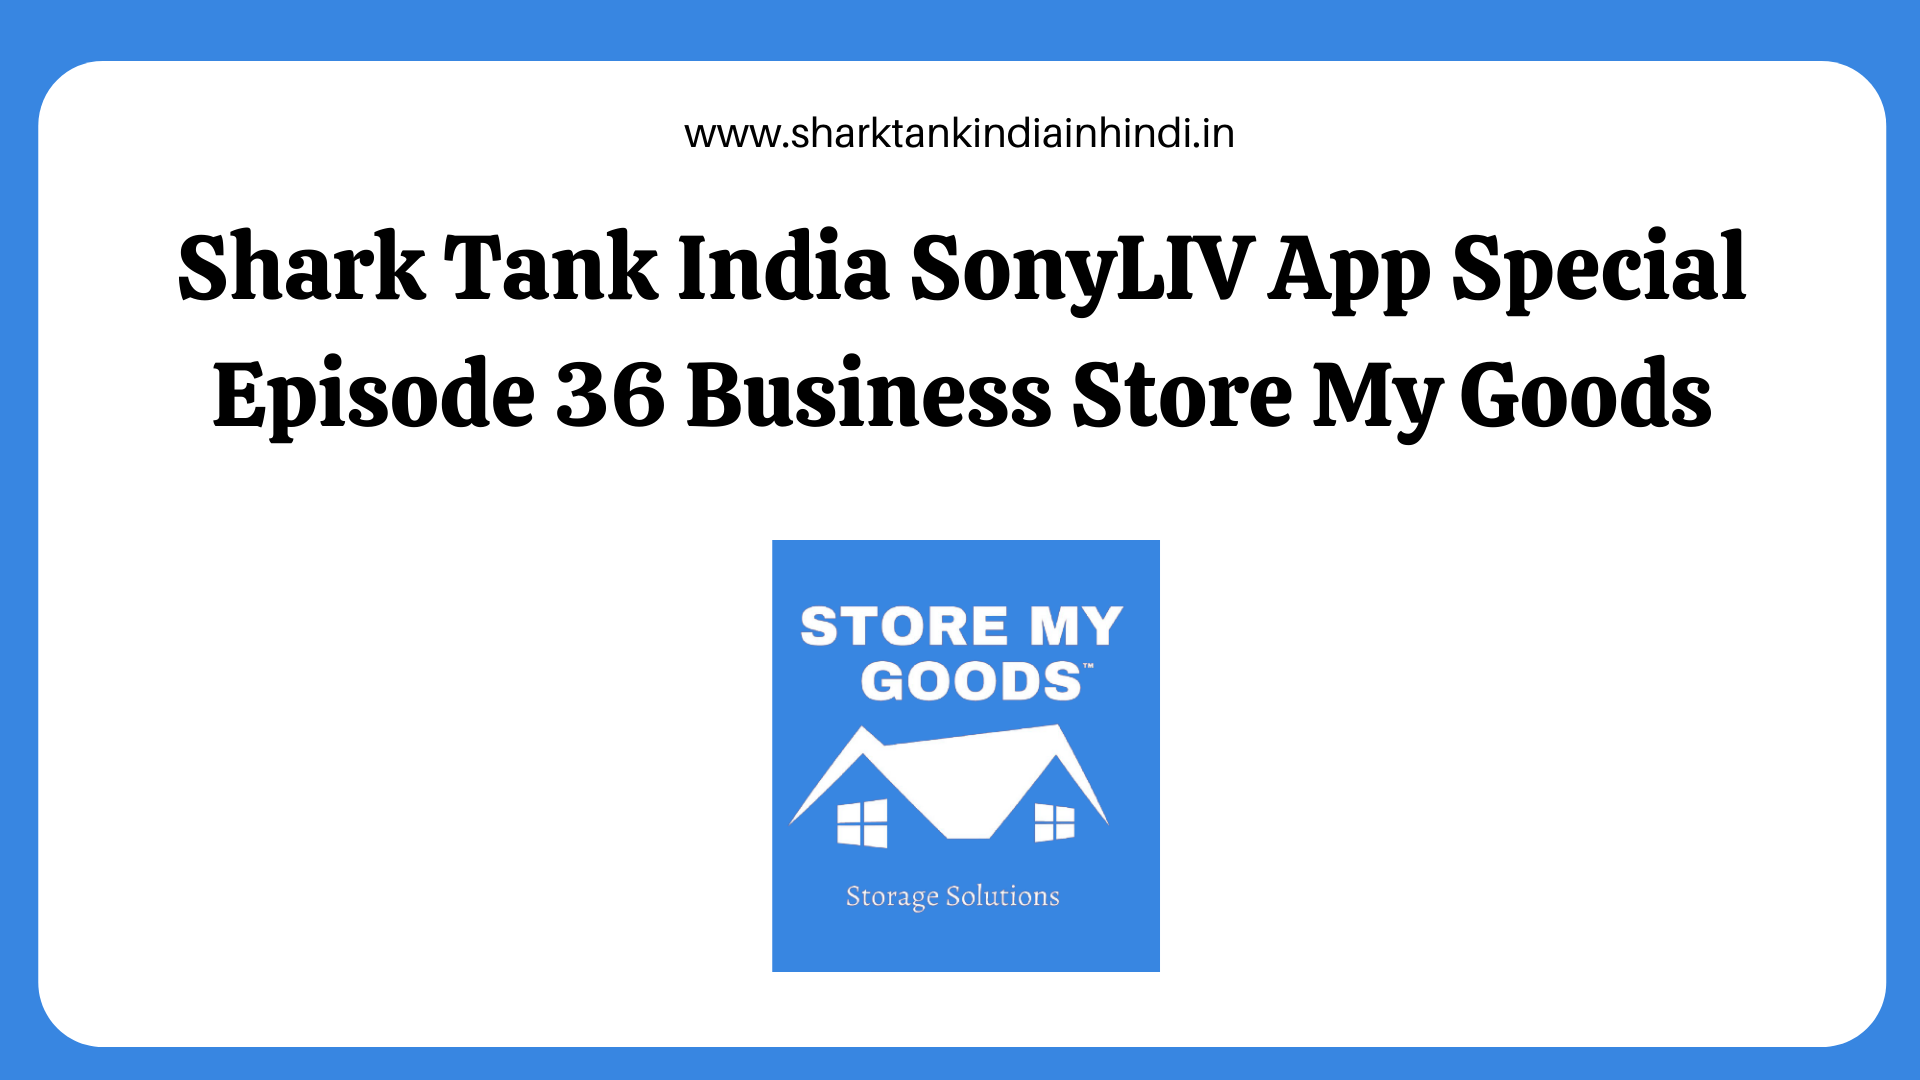 Shark Tank India SonyLIV App Special Episode 36 Business Store My Goods